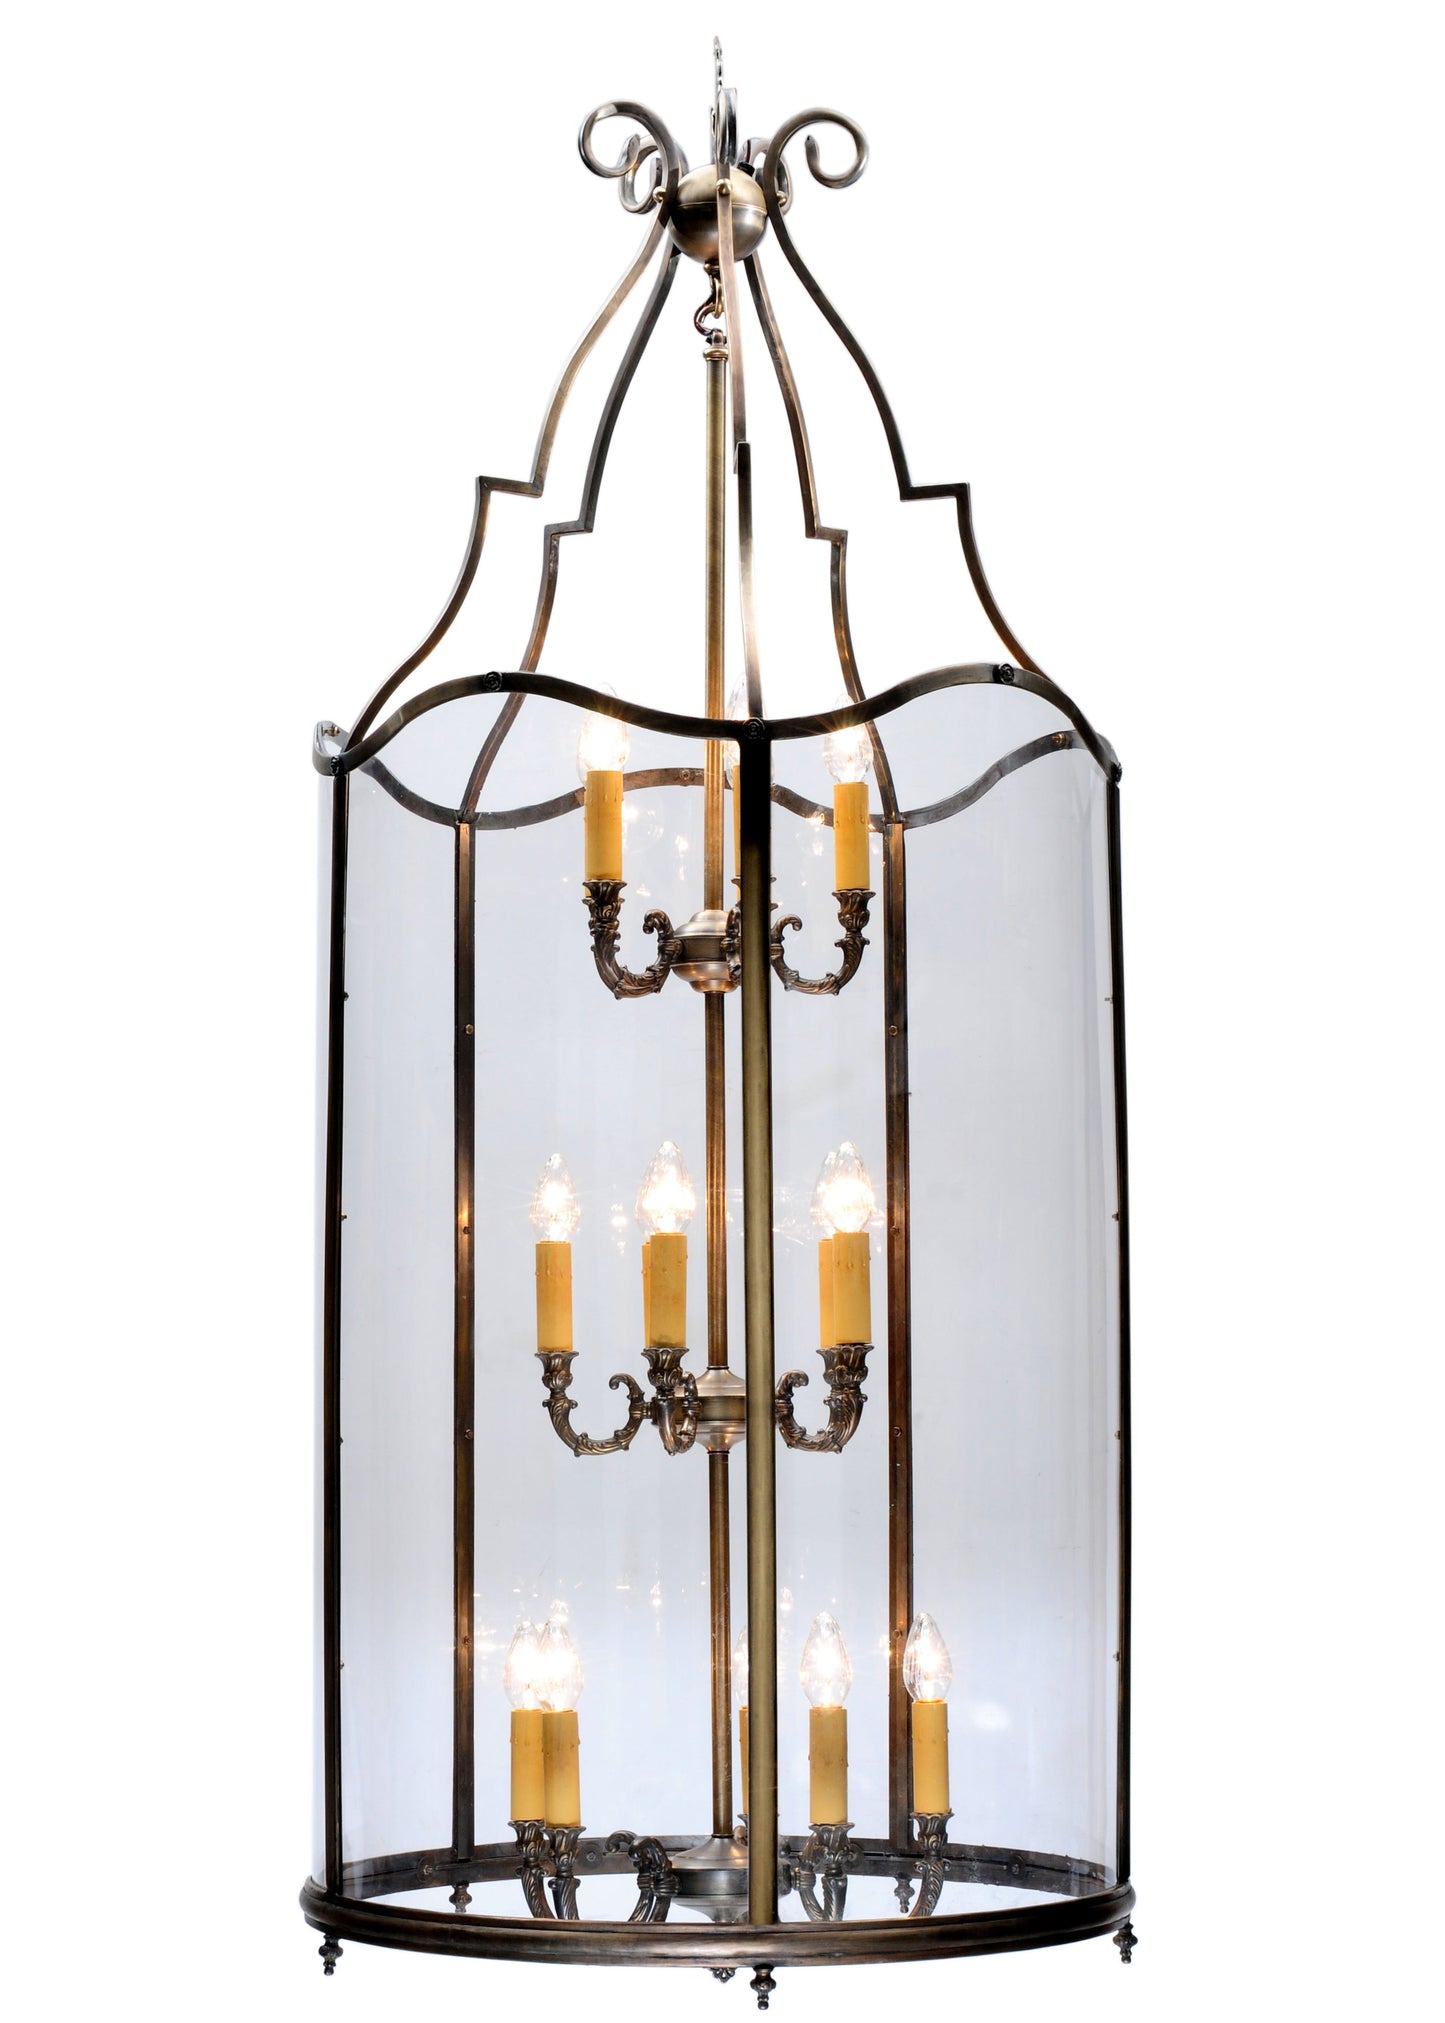 30" Sanctuary Pendant by 2nd Ave Lighting